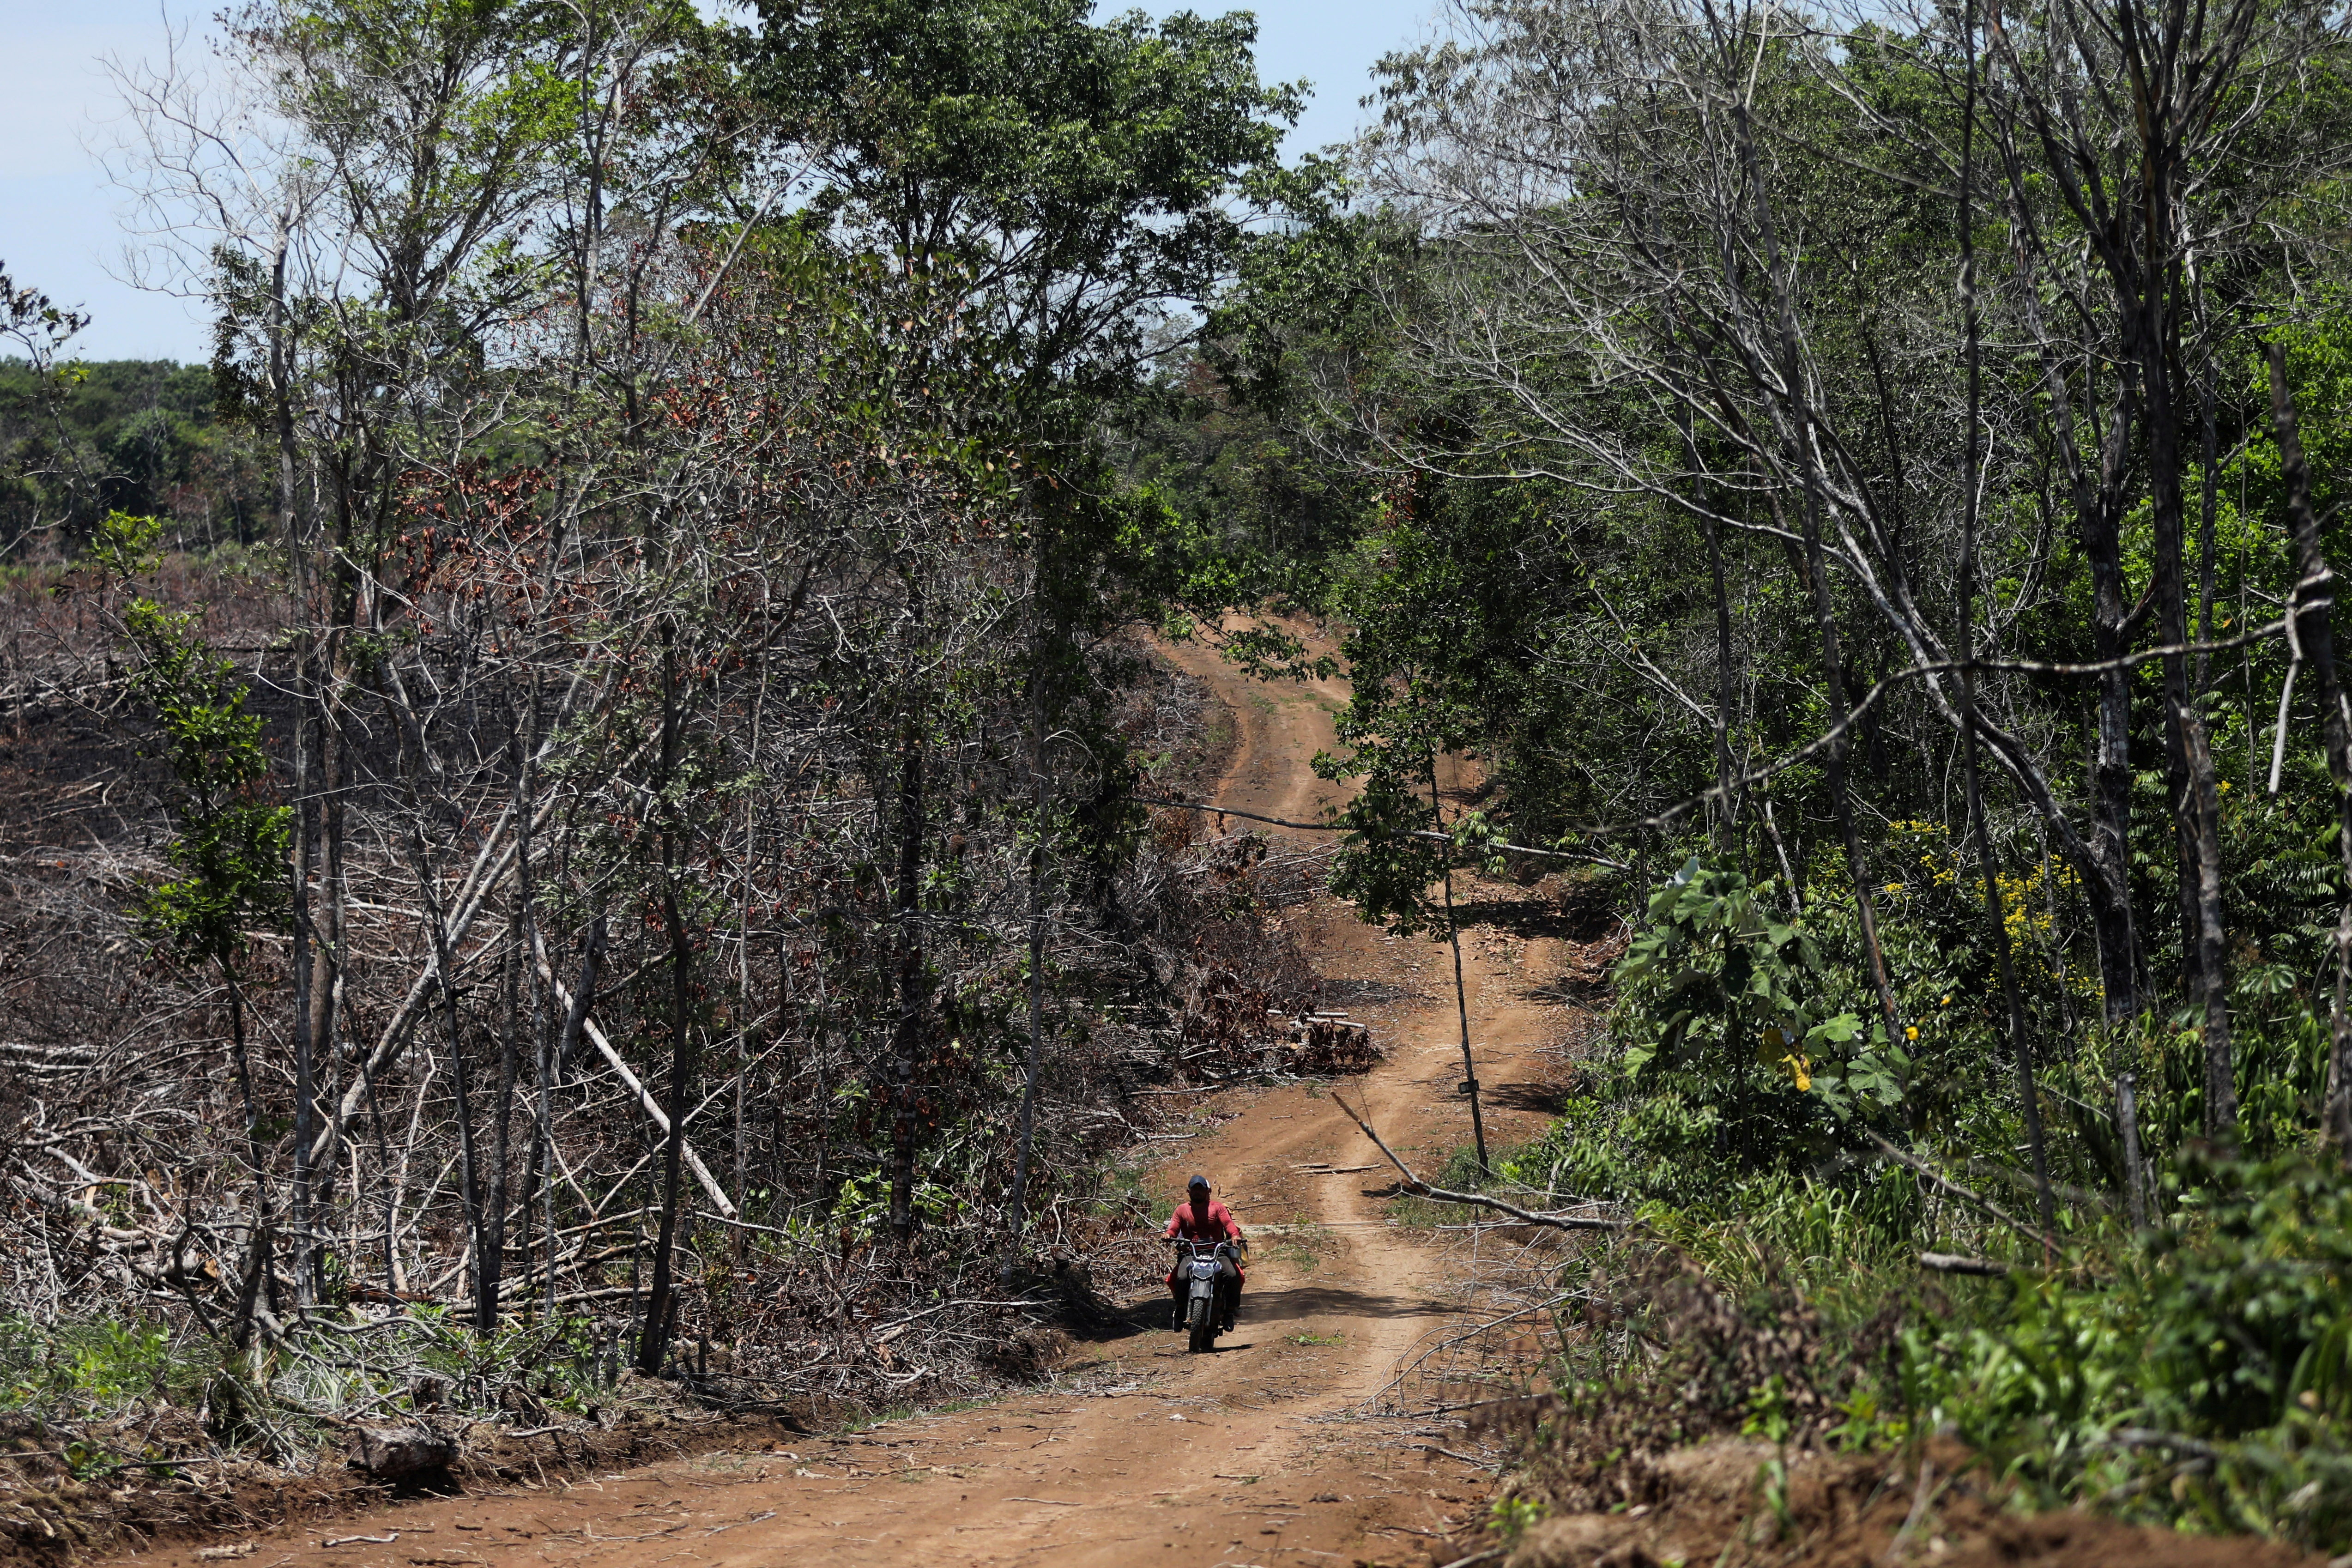 A man rides a motorcycle on an illegal road made during the deforestation of the Yari plains, in Caqueta